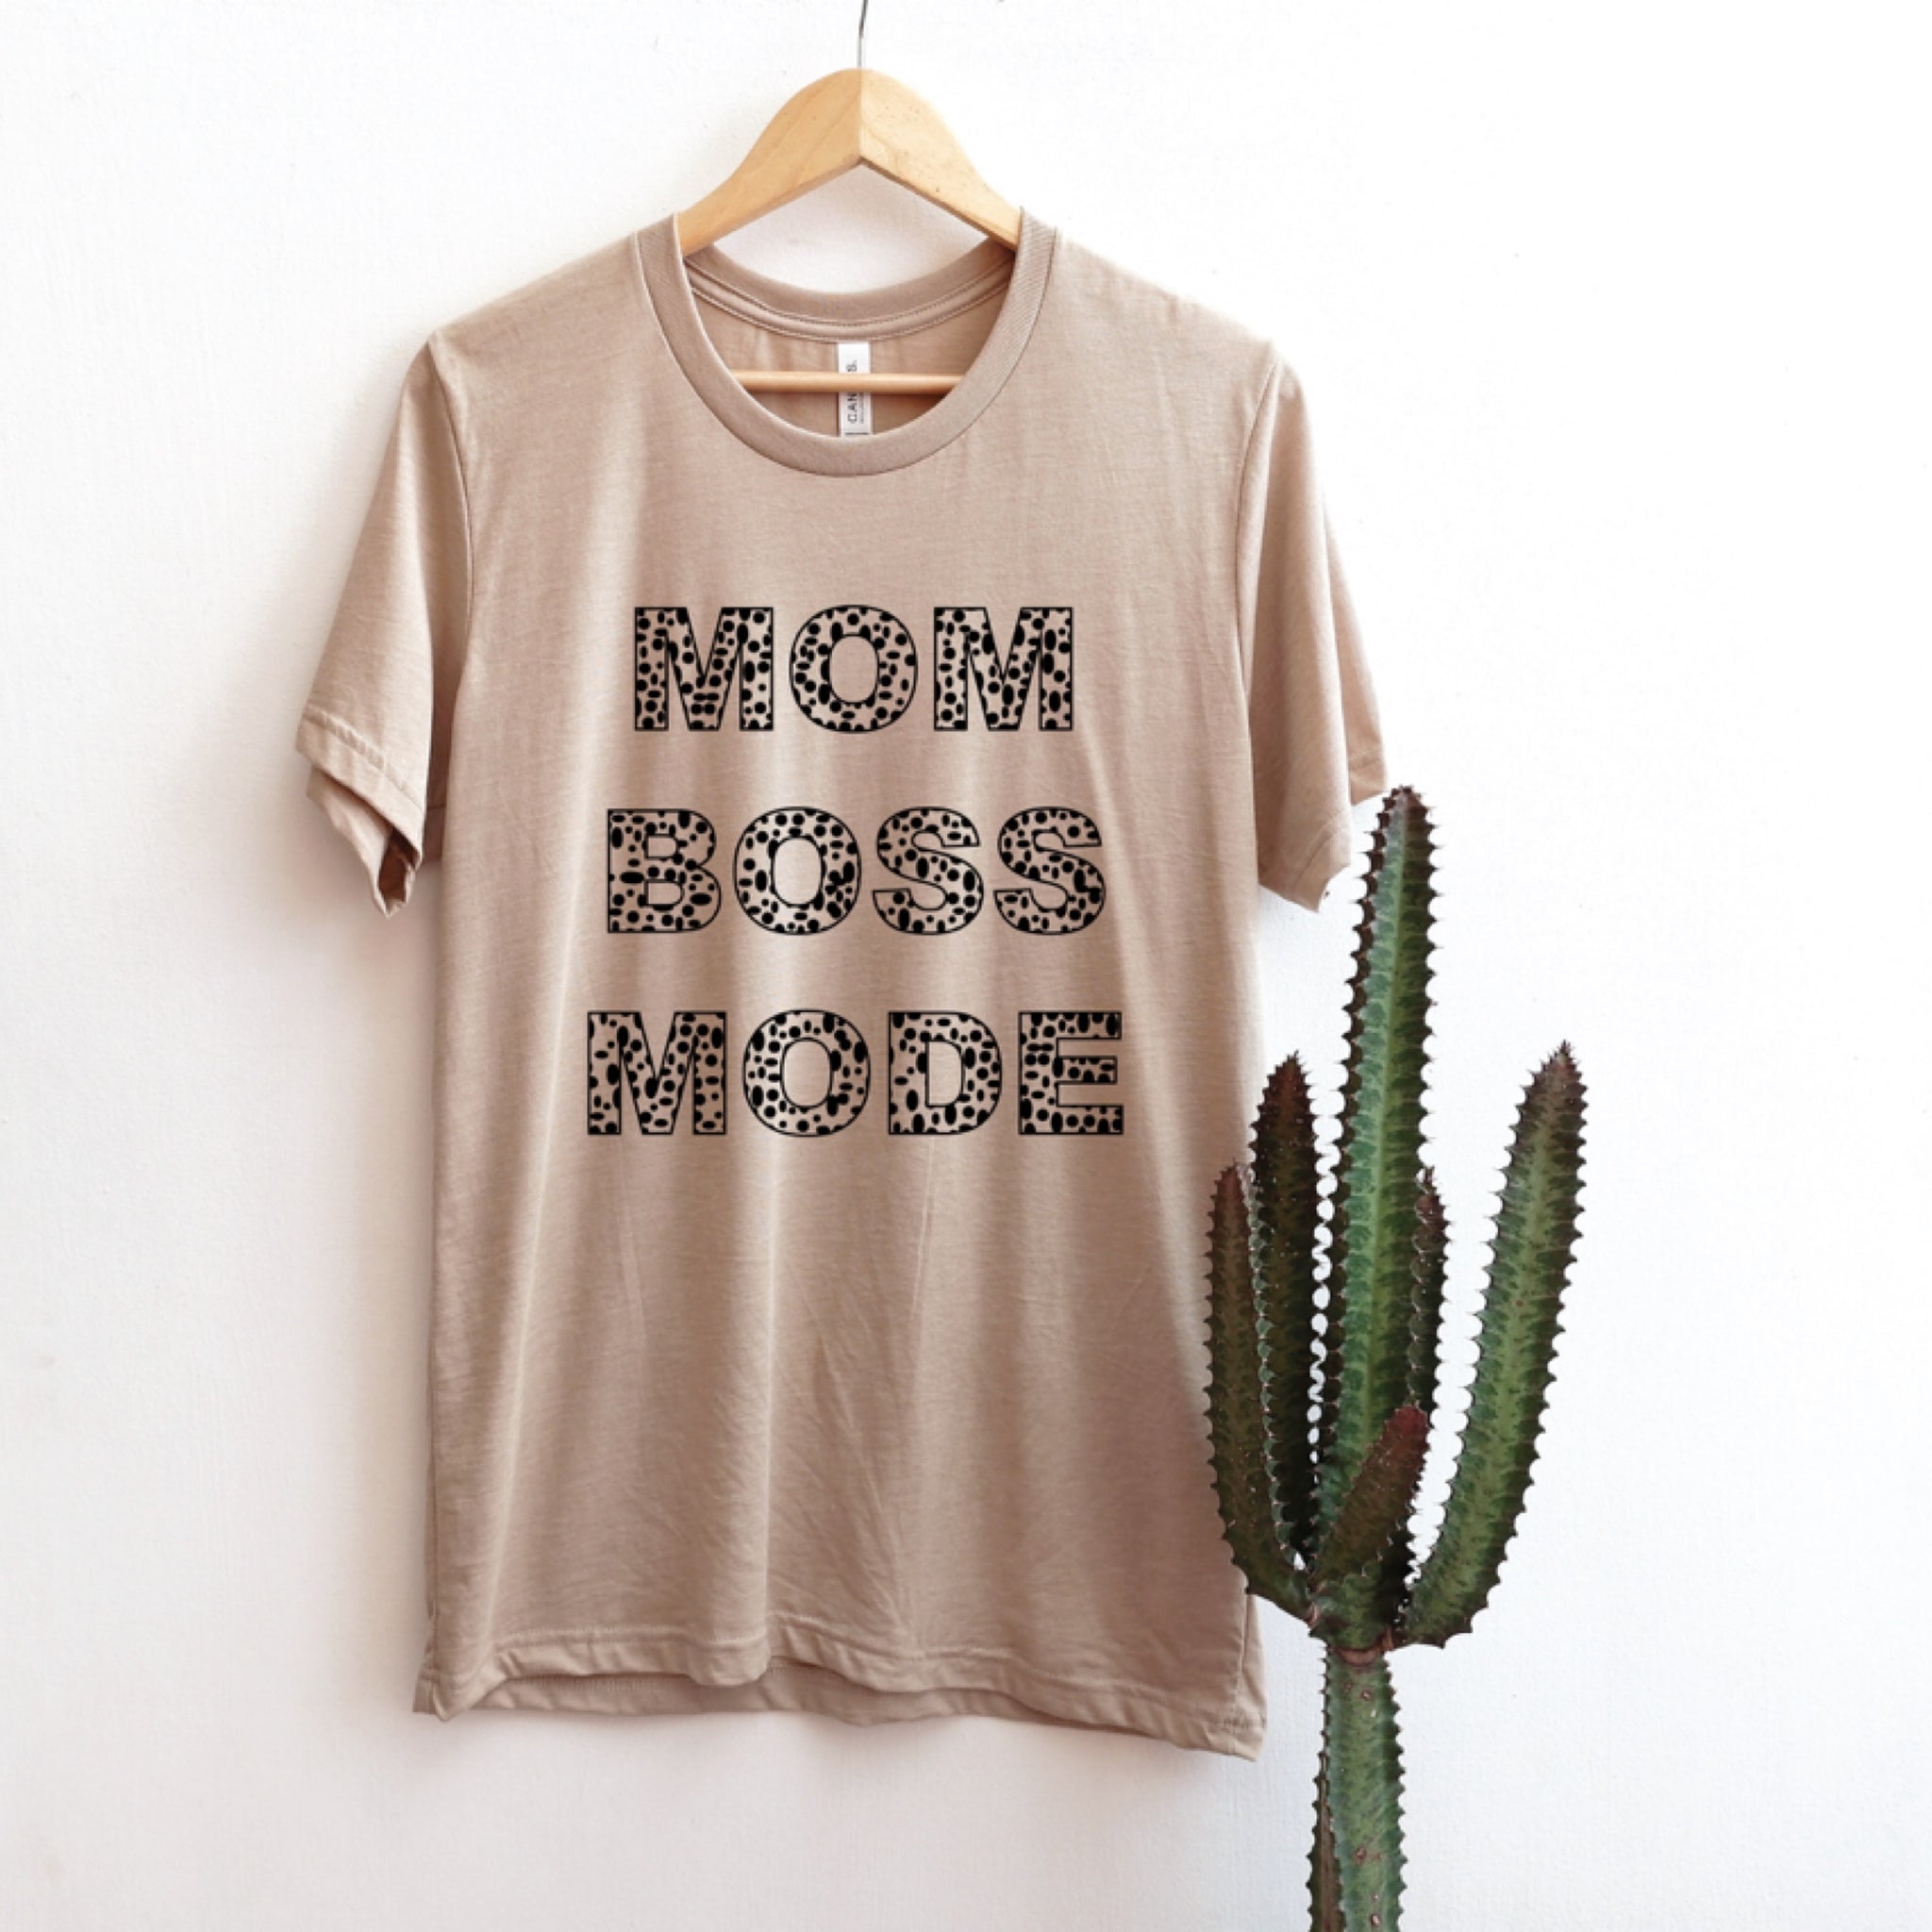 PREORDER {Spotted} Mom Boss Mode NEW [Tan Crewneck]